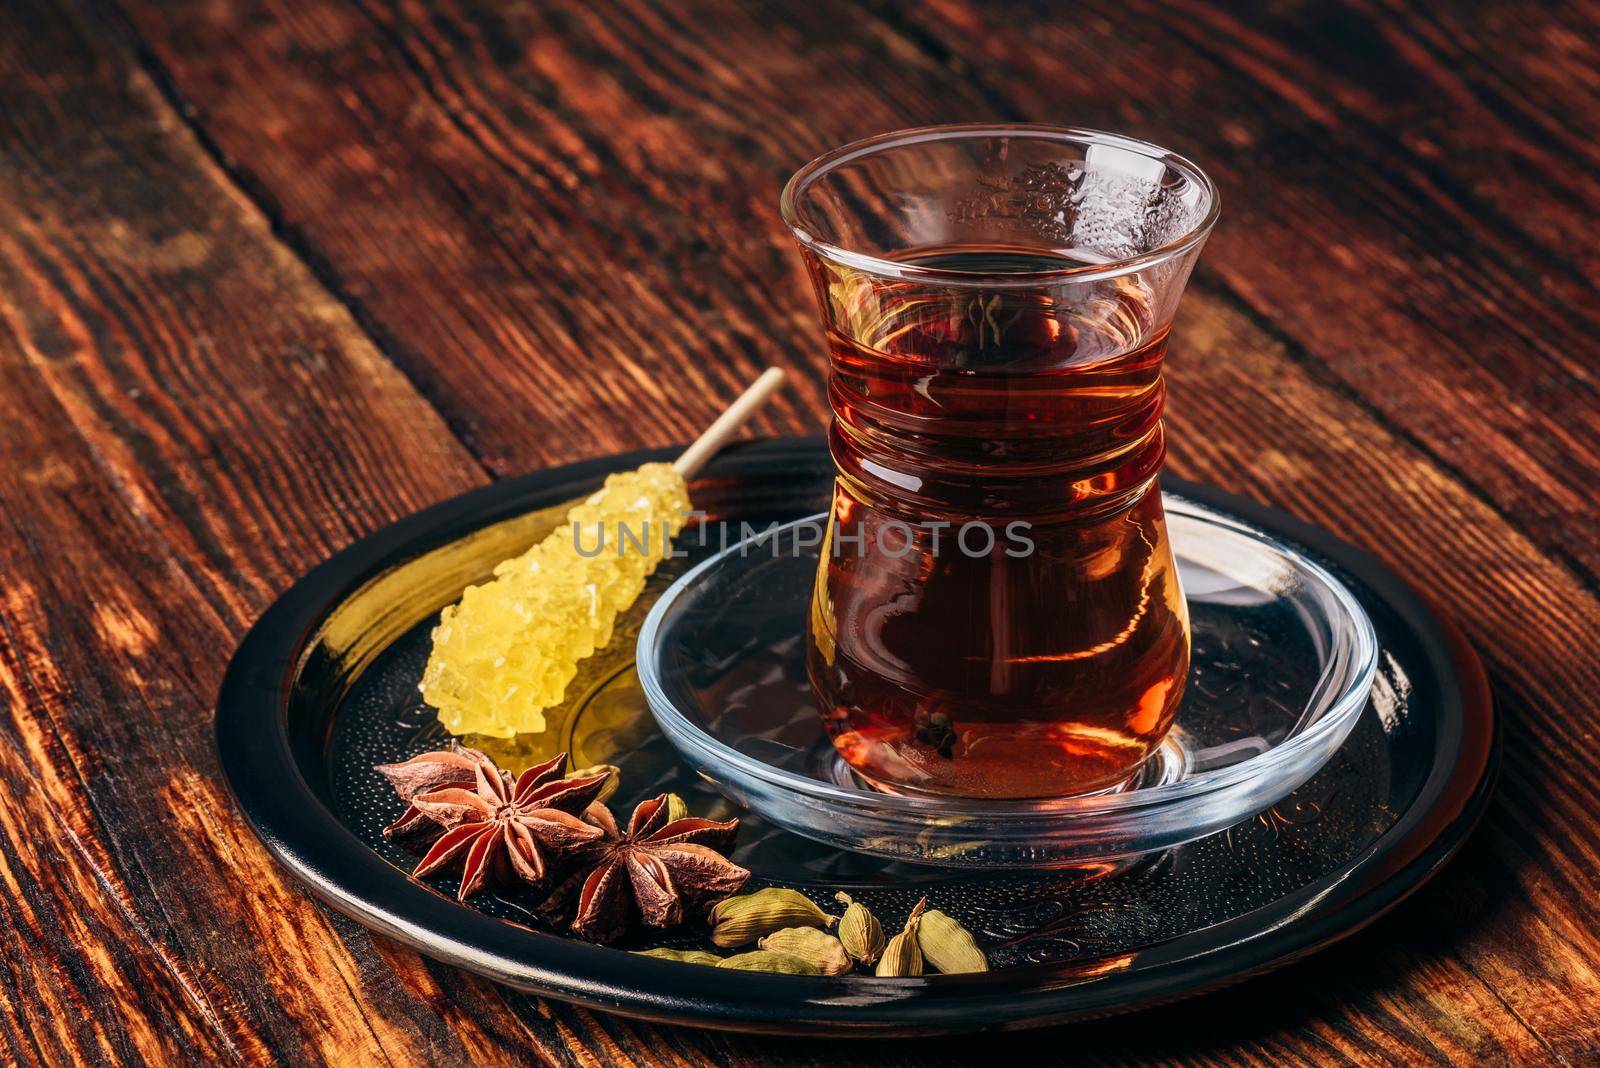 Oriental glass with Spiced tea and navad on metal tray over wooden surface